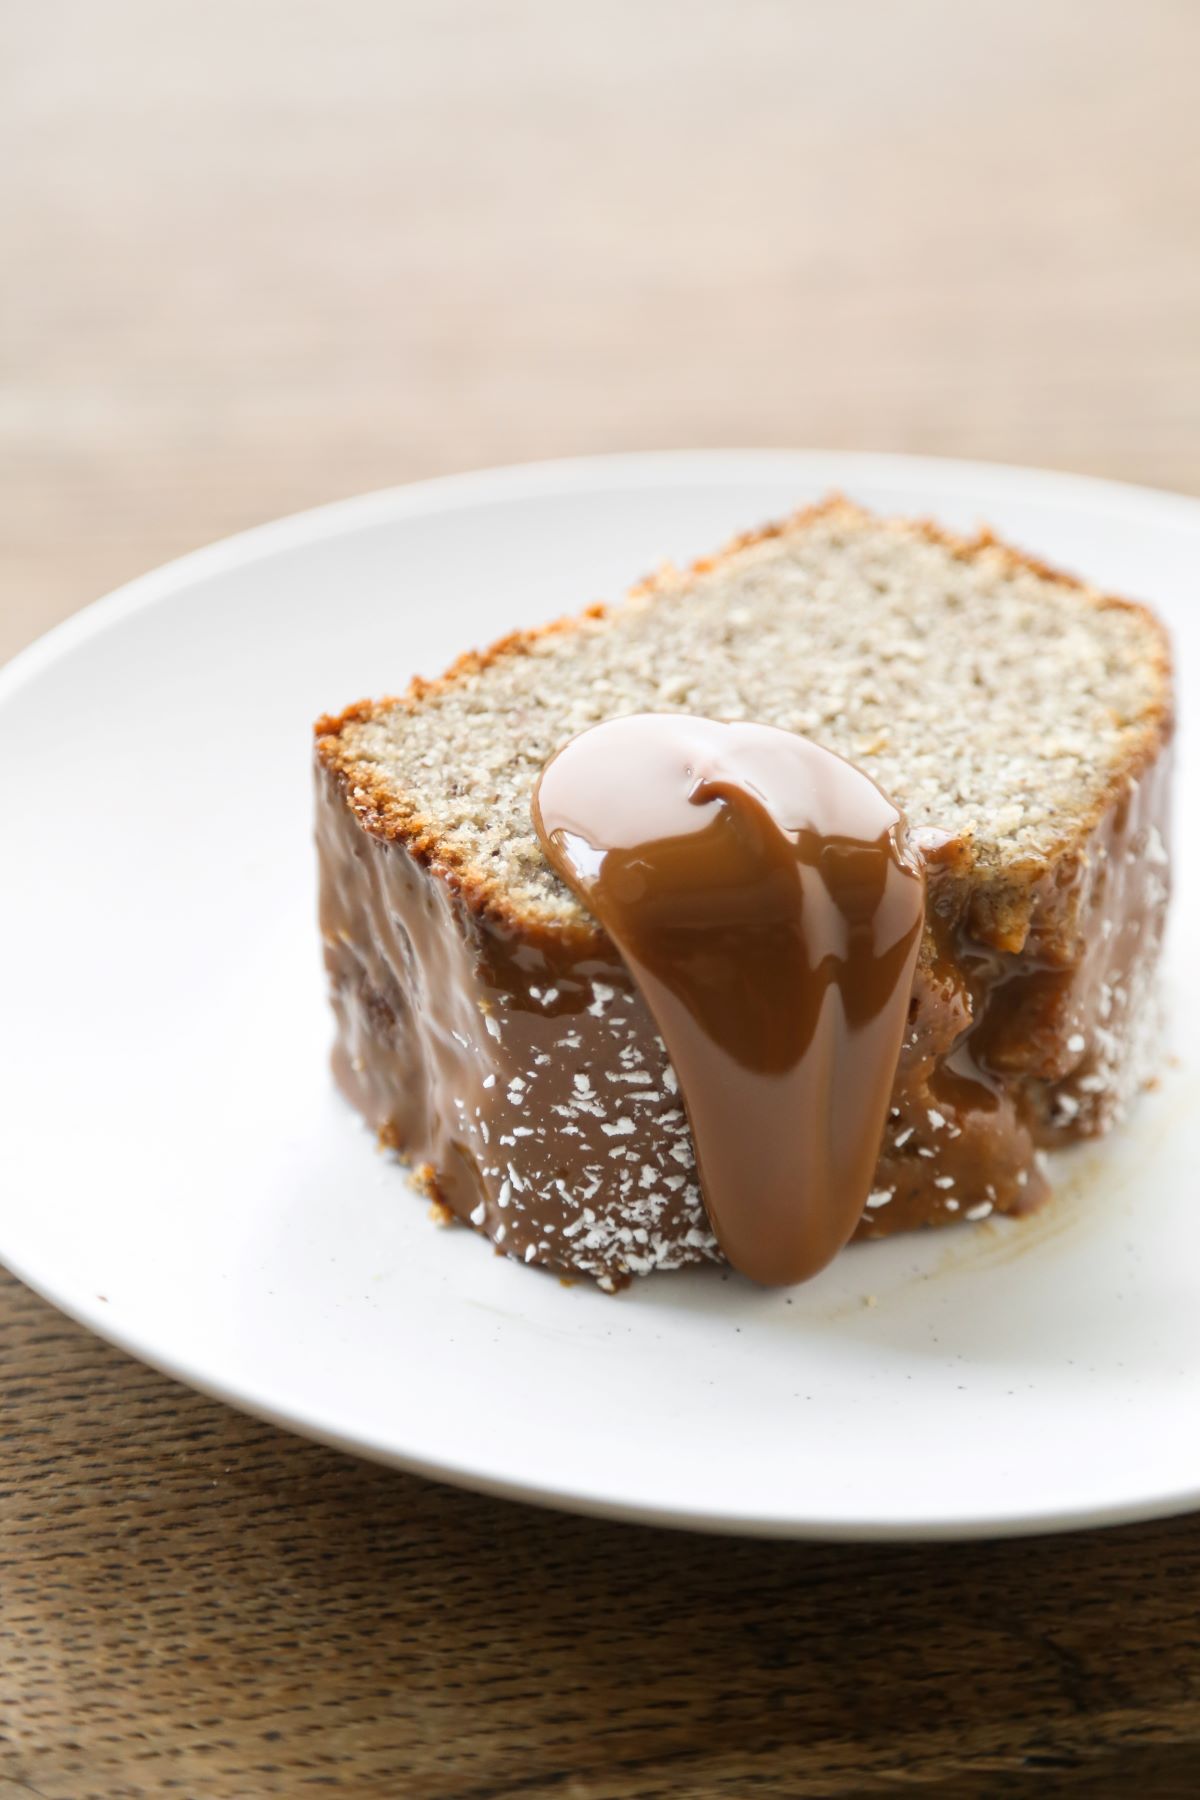 Slice of banana loaf cake with dulce de leche falling down, on a white plate.